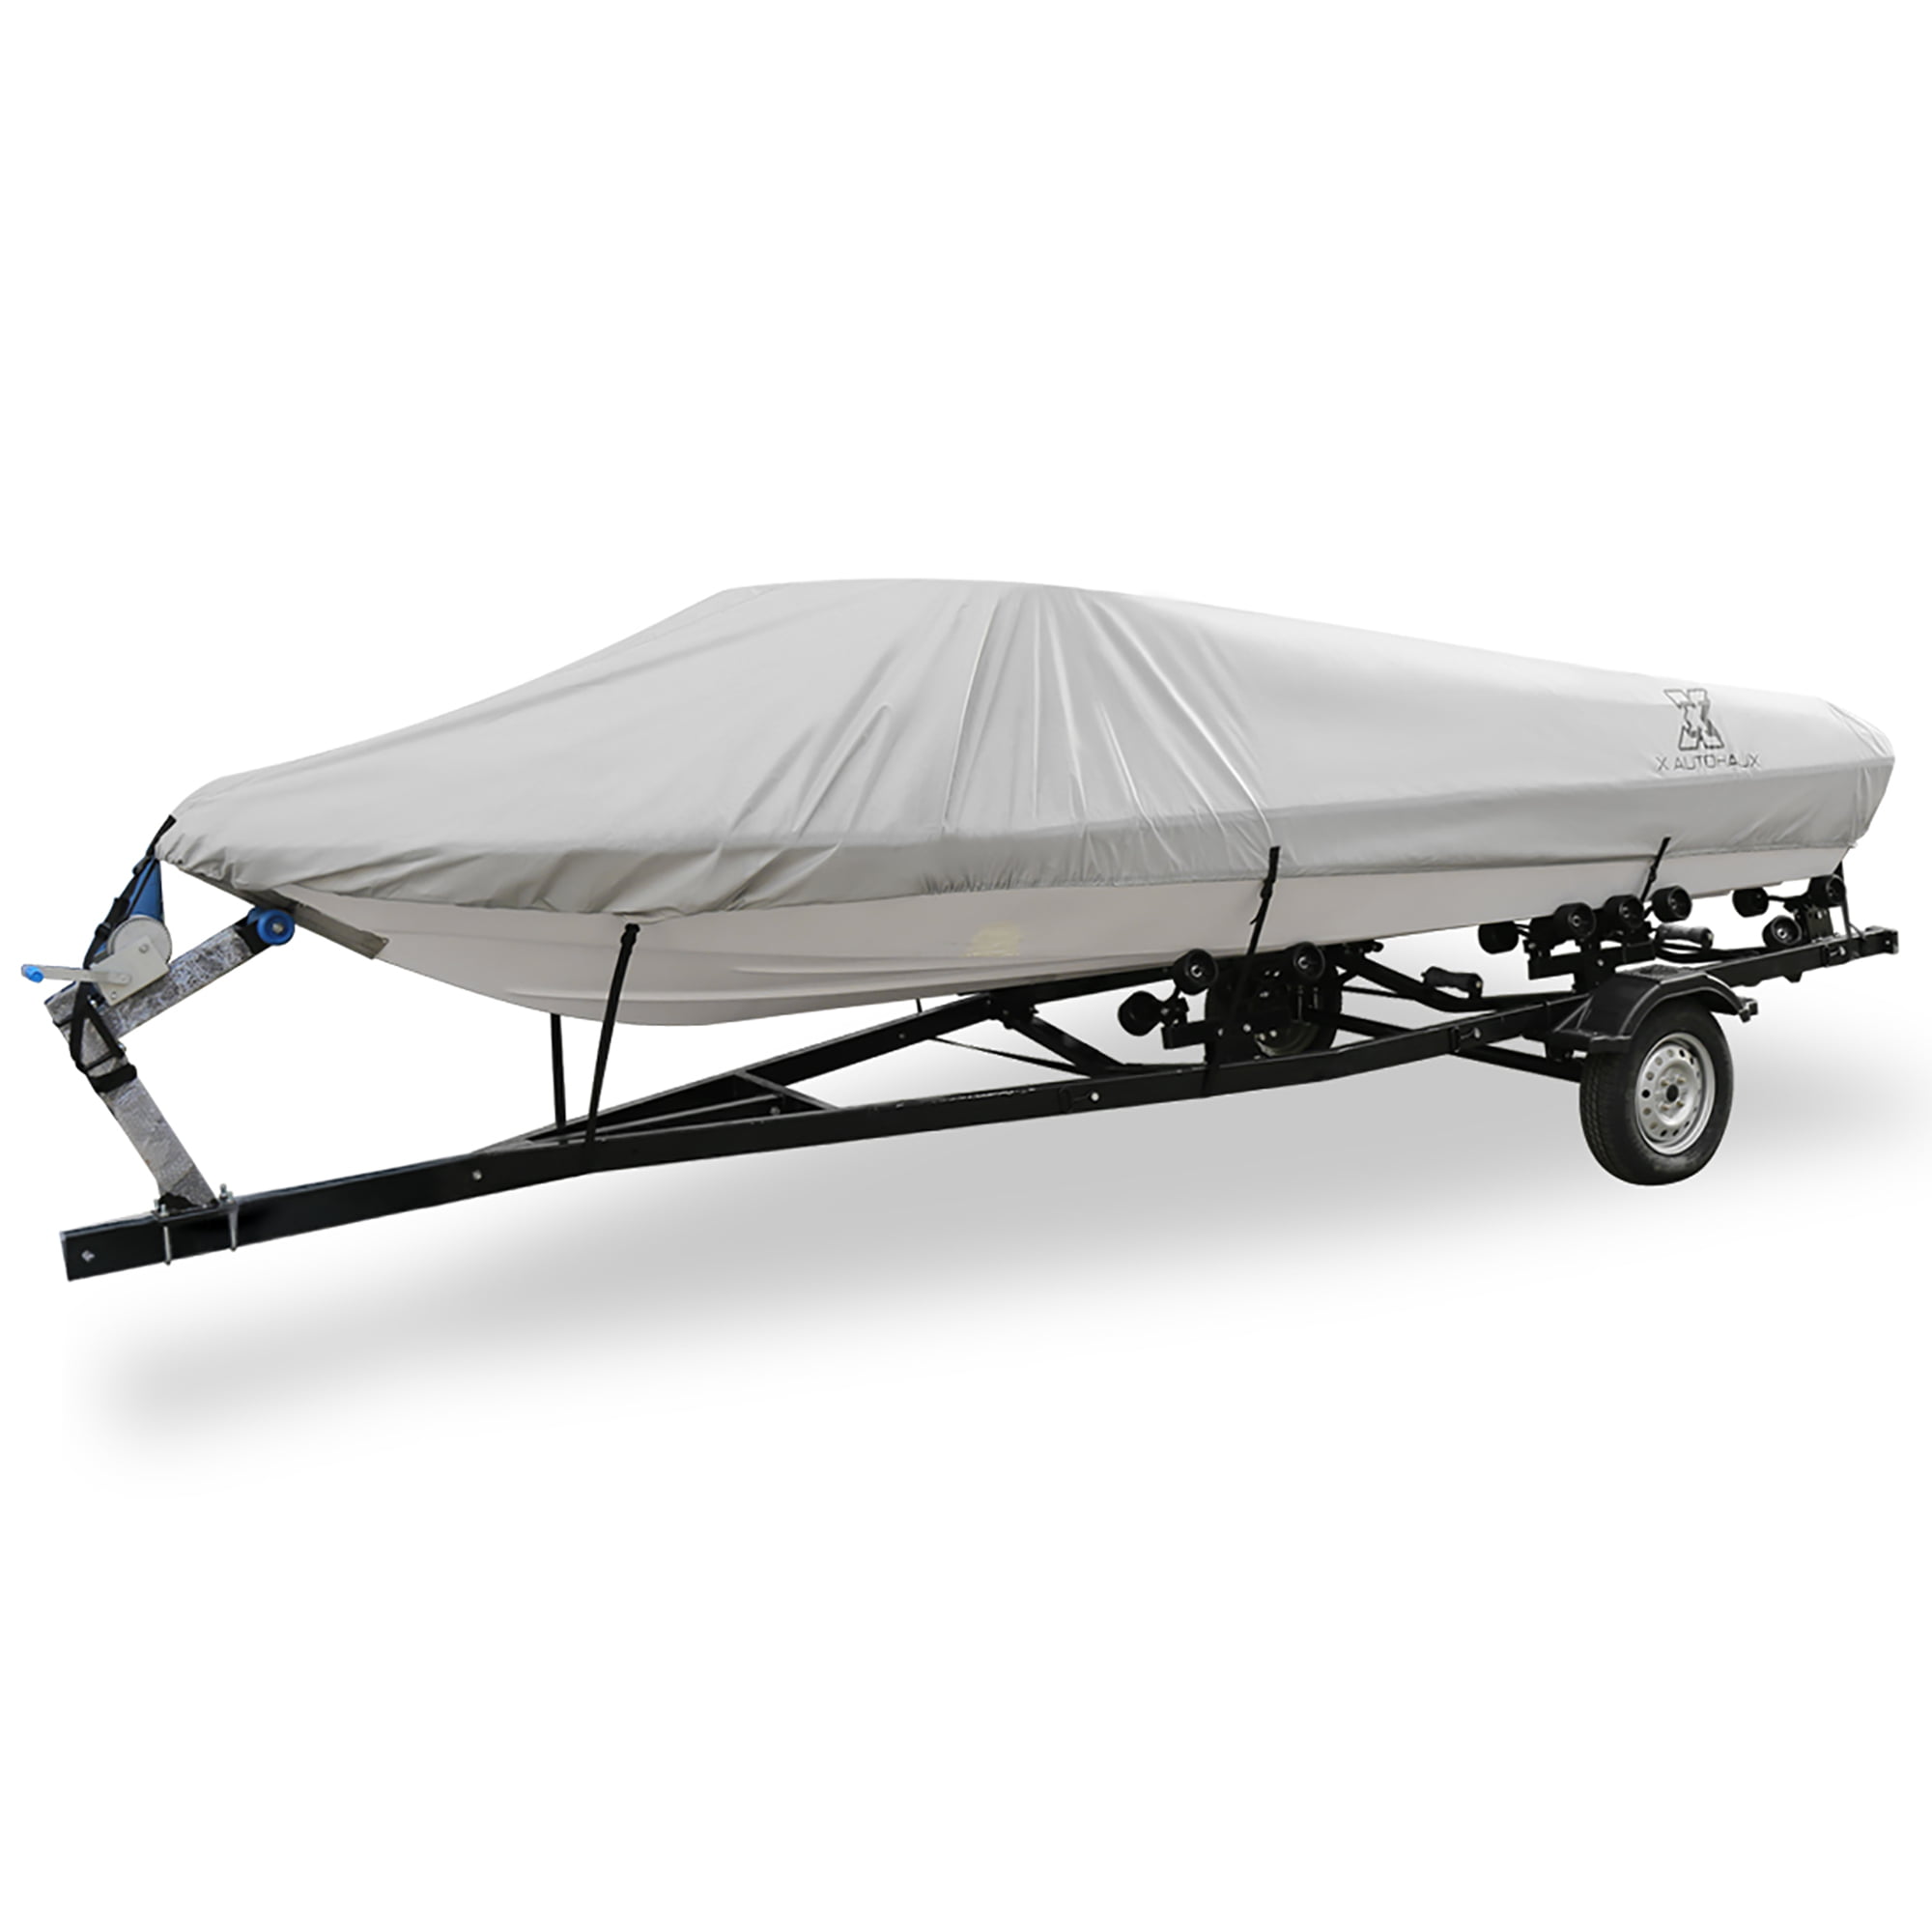 1719ft 96" 300D Polyester Boat Cover Waterproof Gray VHull Protector 620 x 300cm